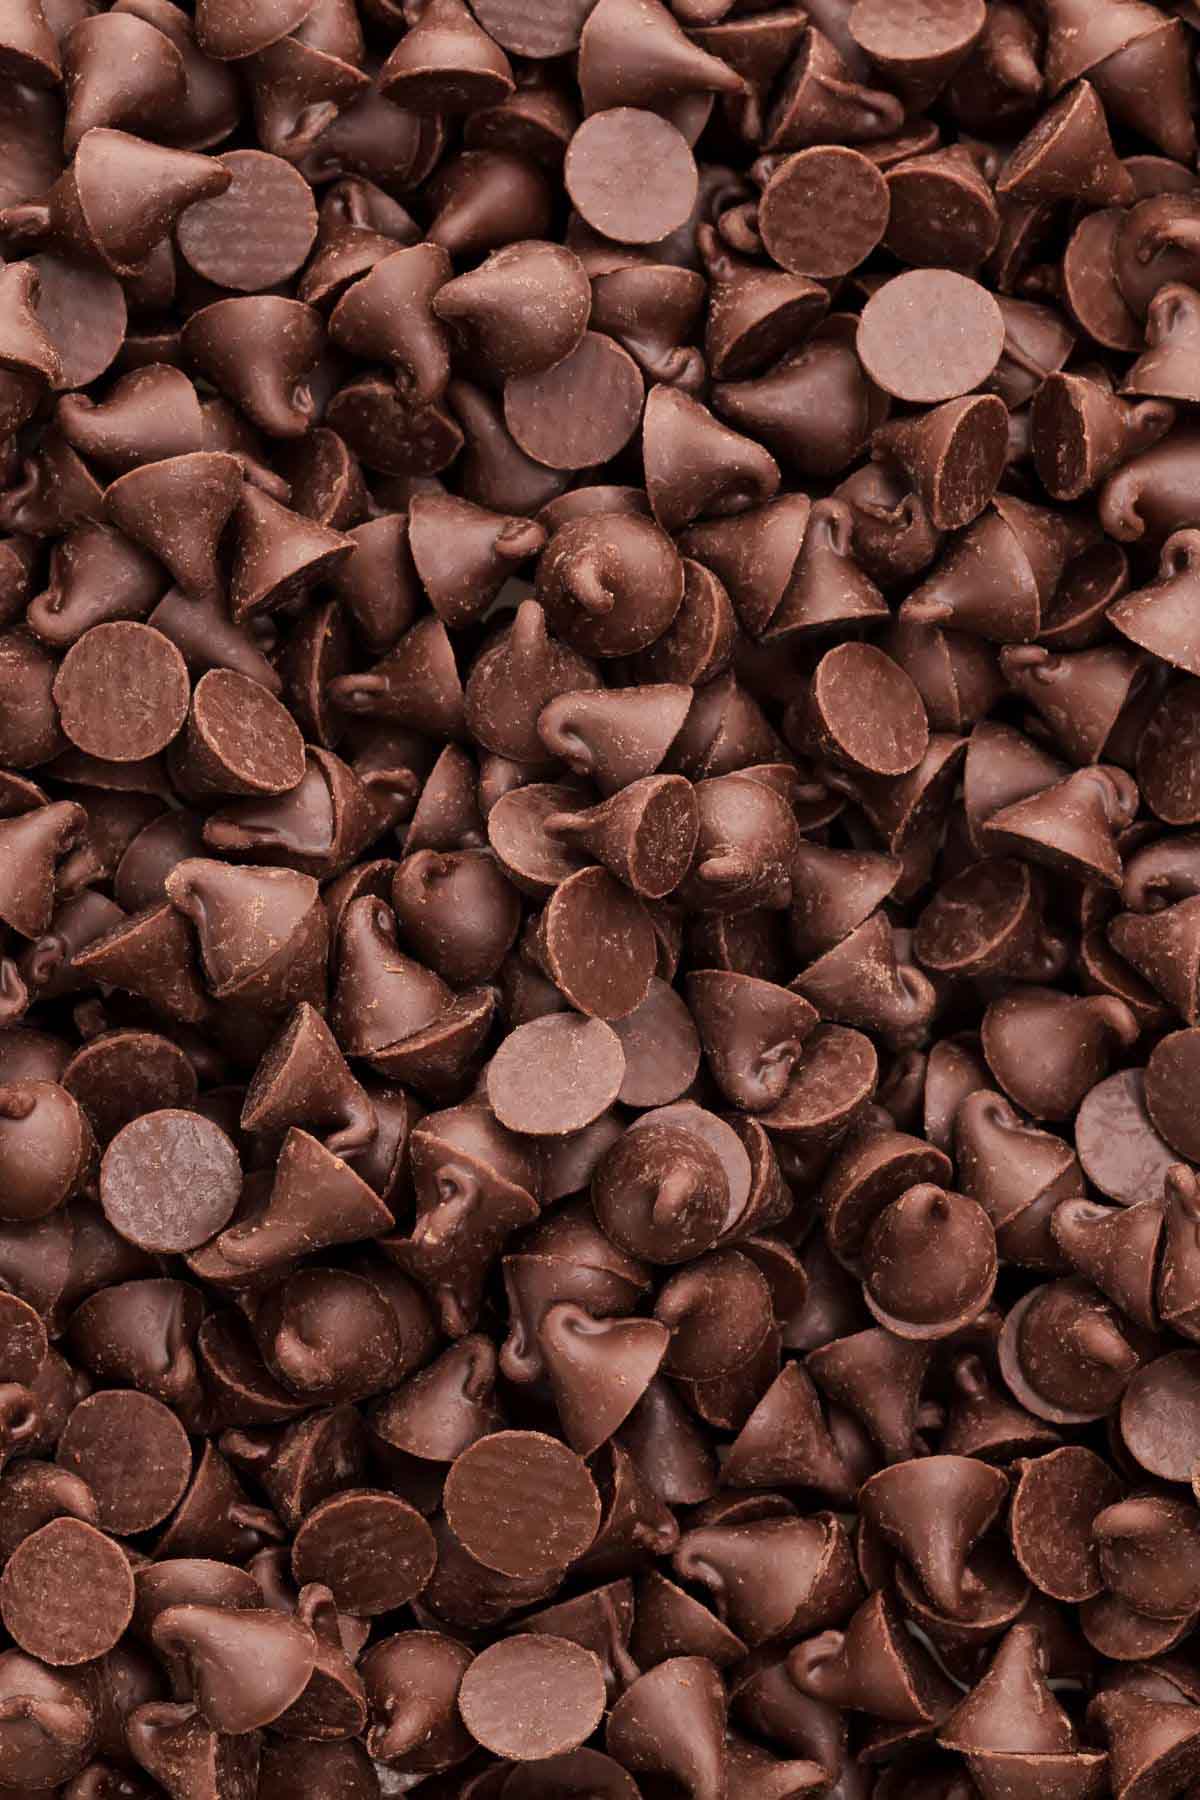 Chocolate chips.